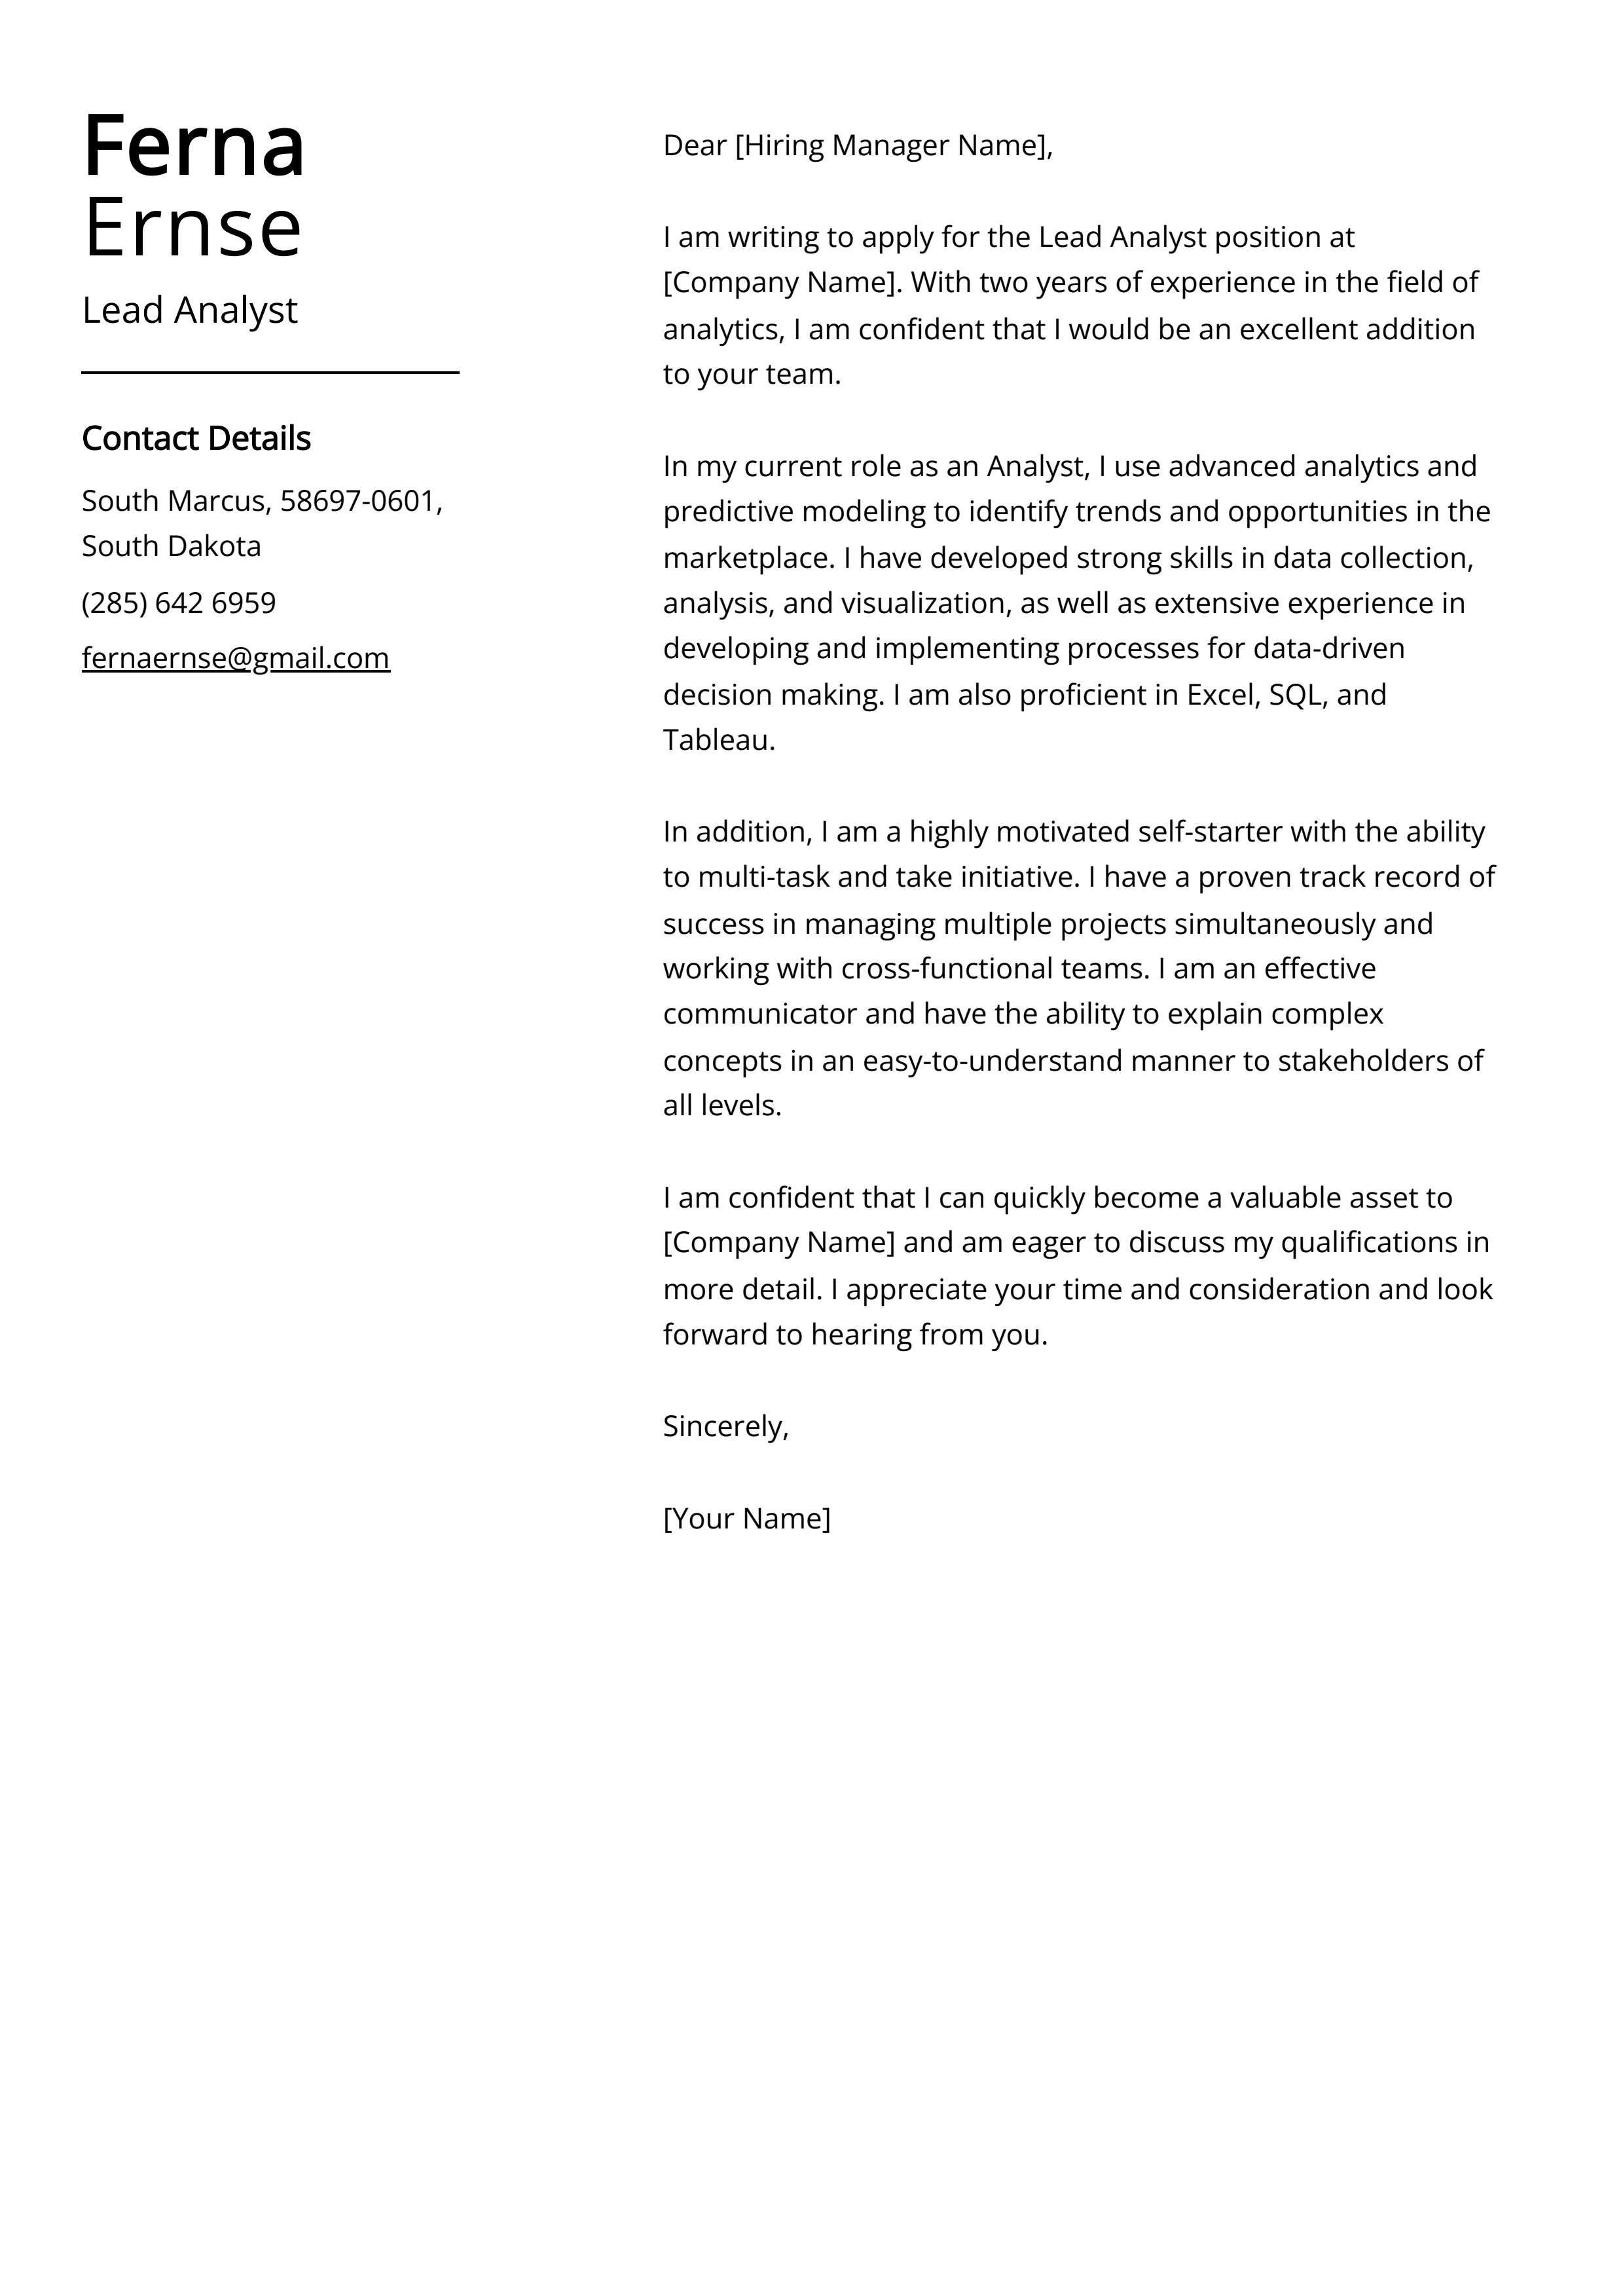 Lead Analyst Cover Letter Example